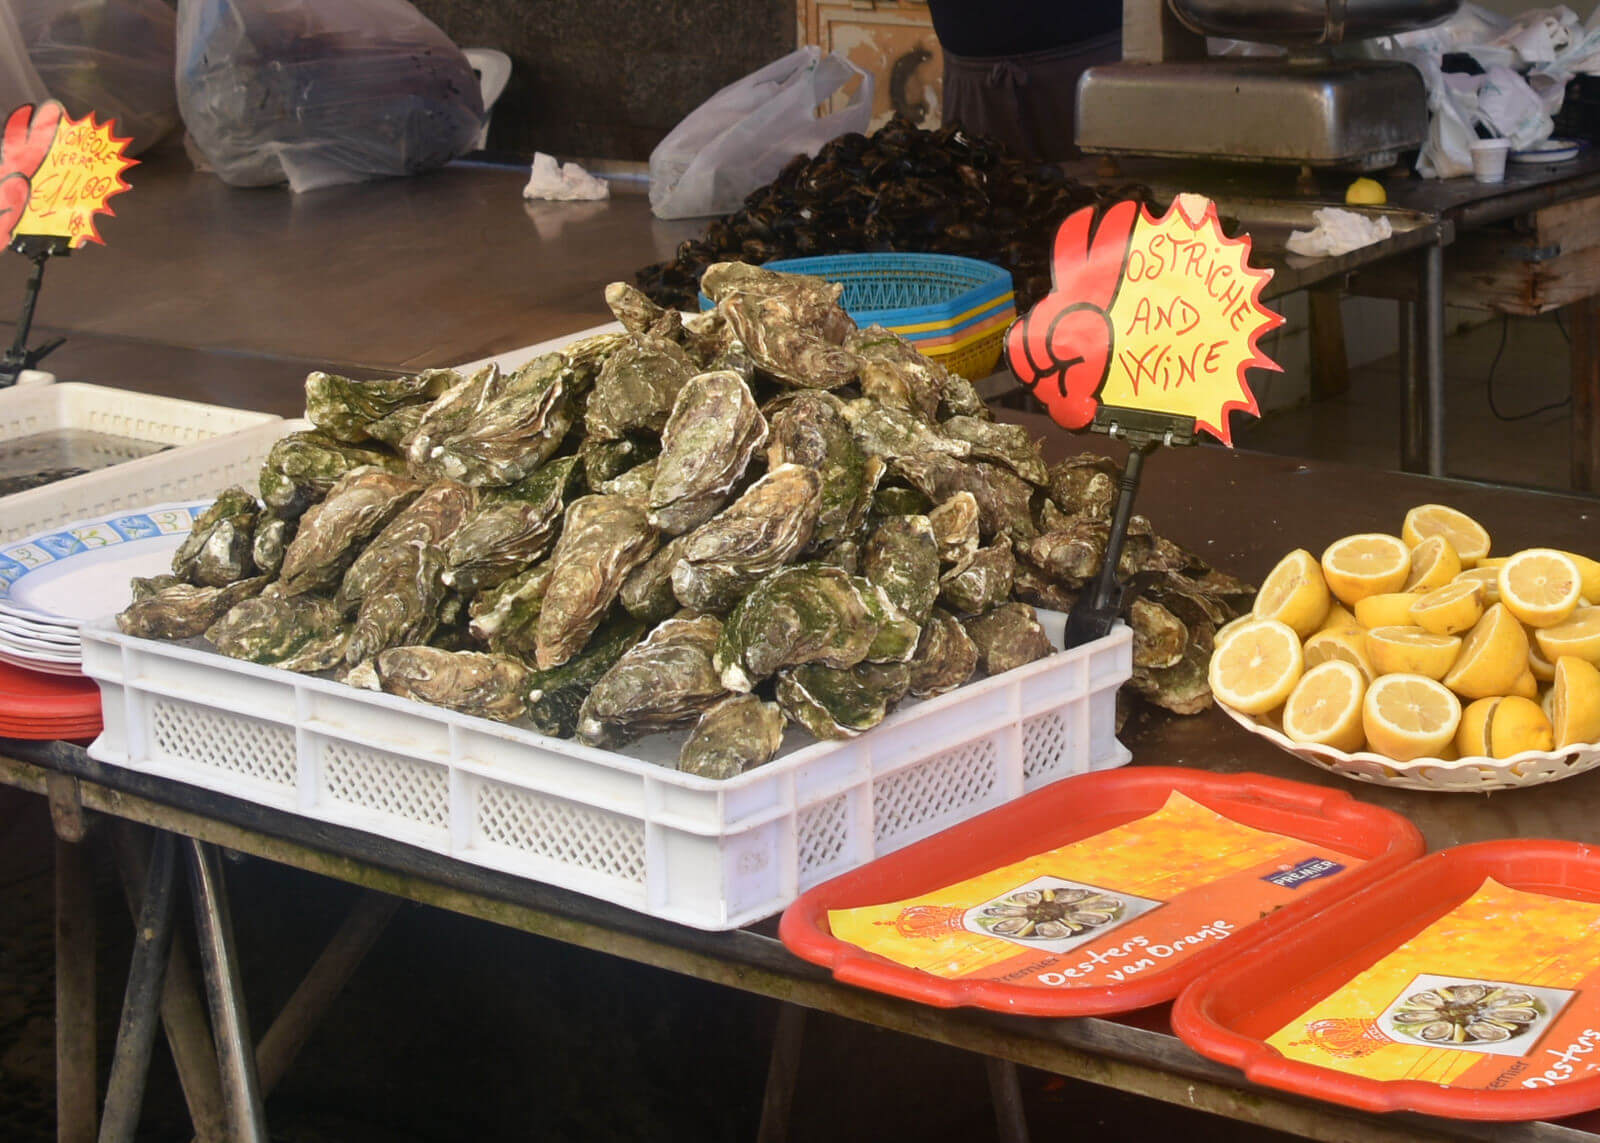 Oysters sold in the market